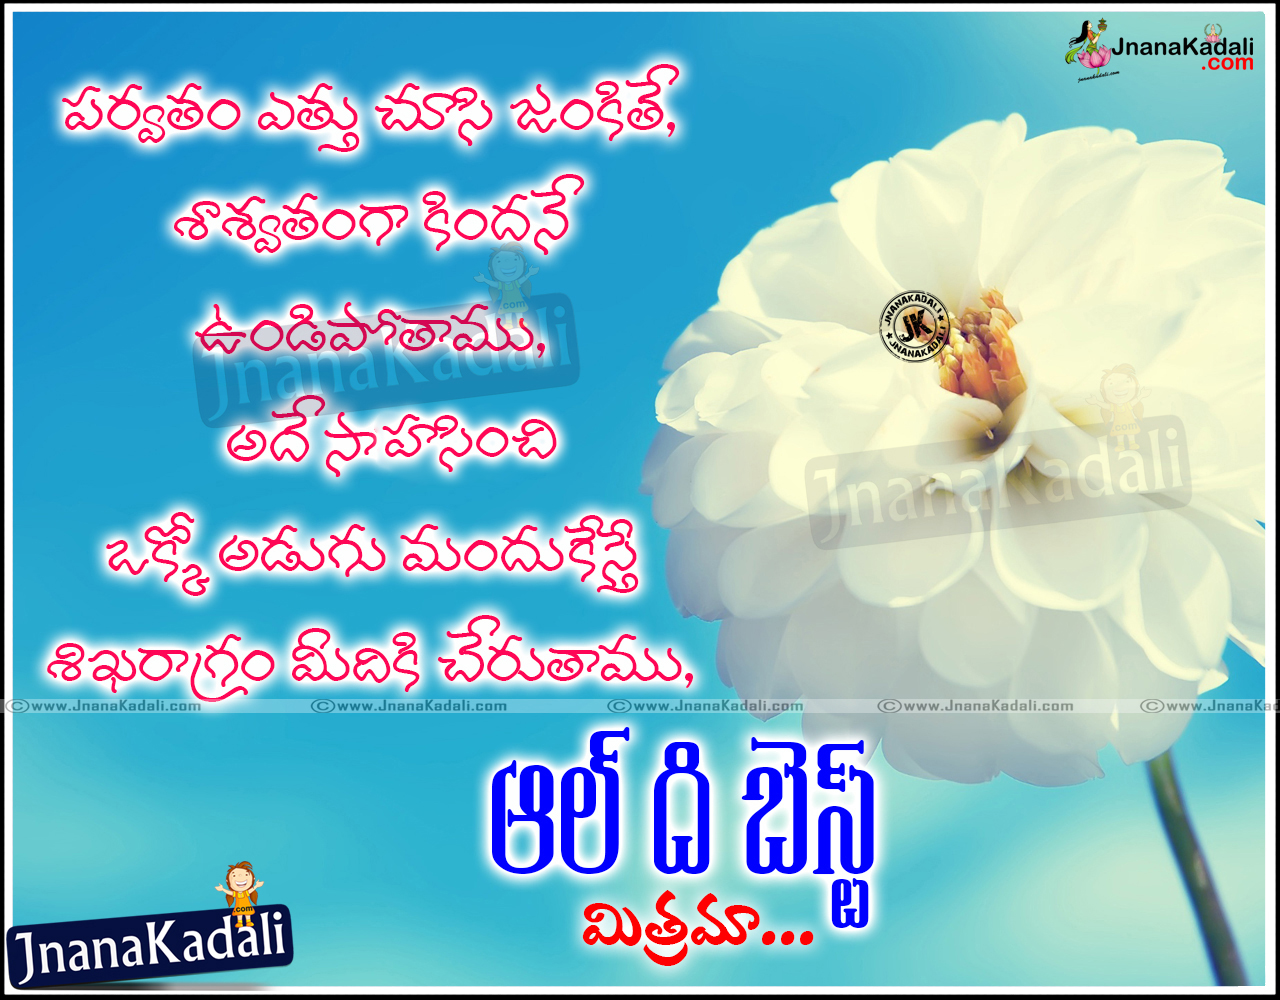 all the best wishes telugu all the best sms telugu best of luck in